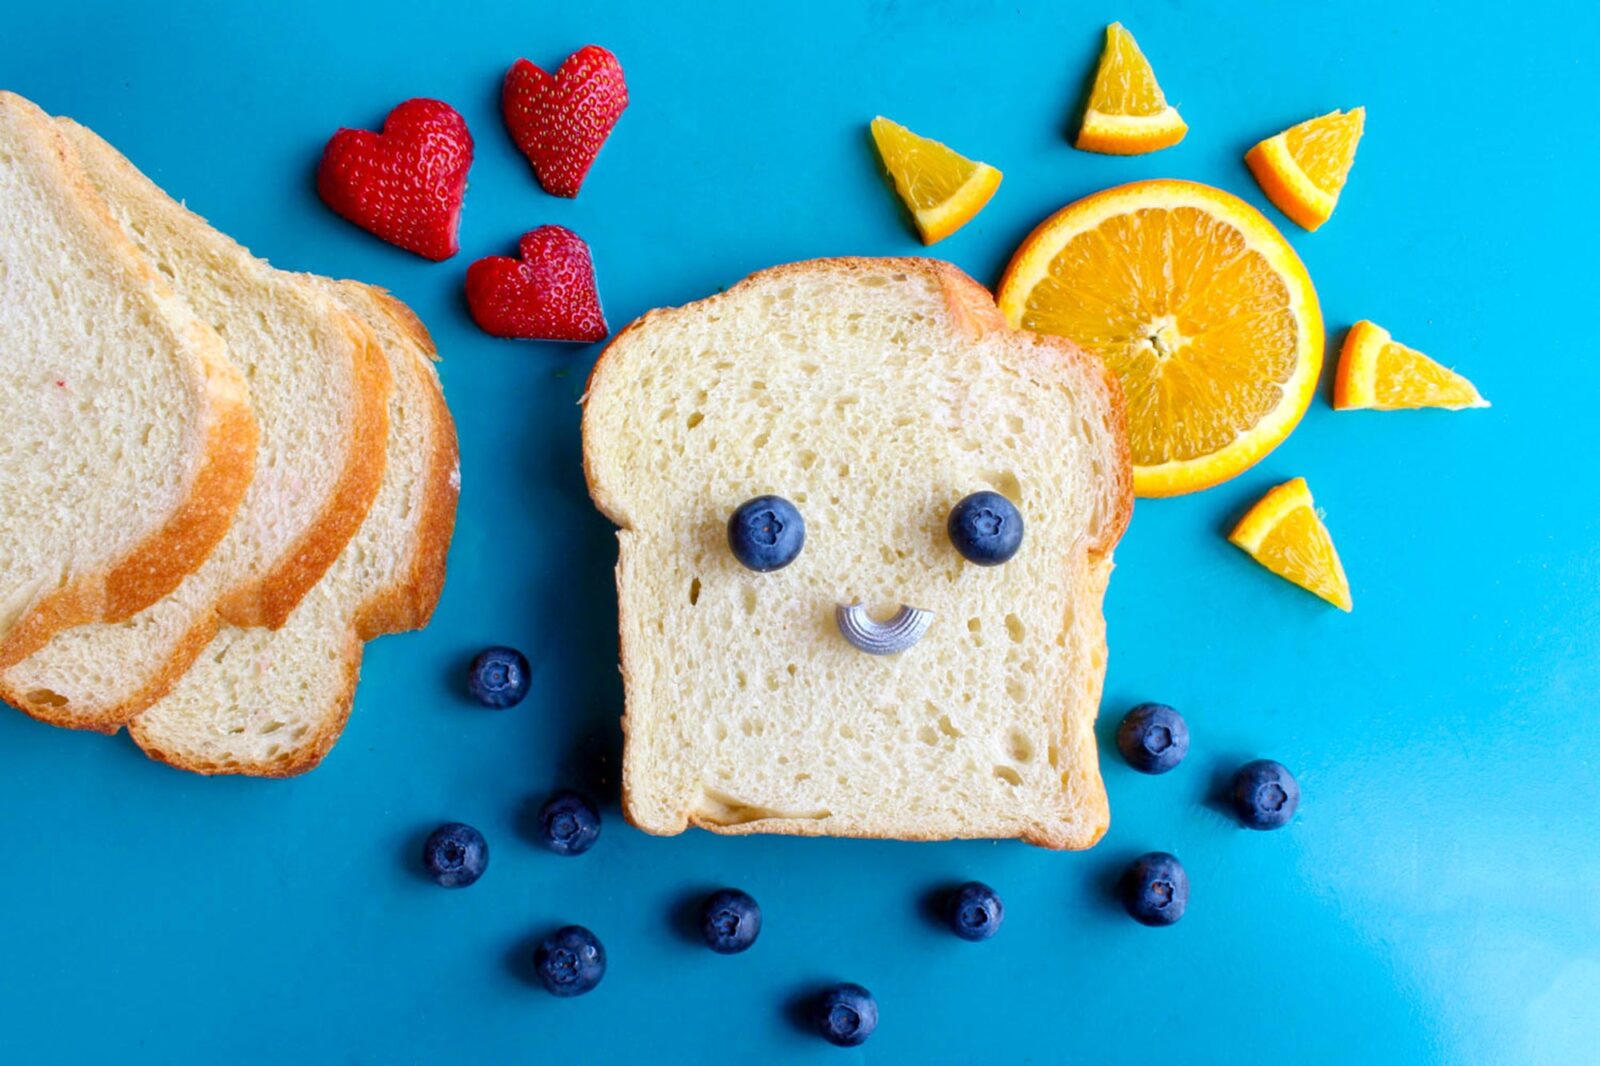 How to Plan Lunches for Kids?